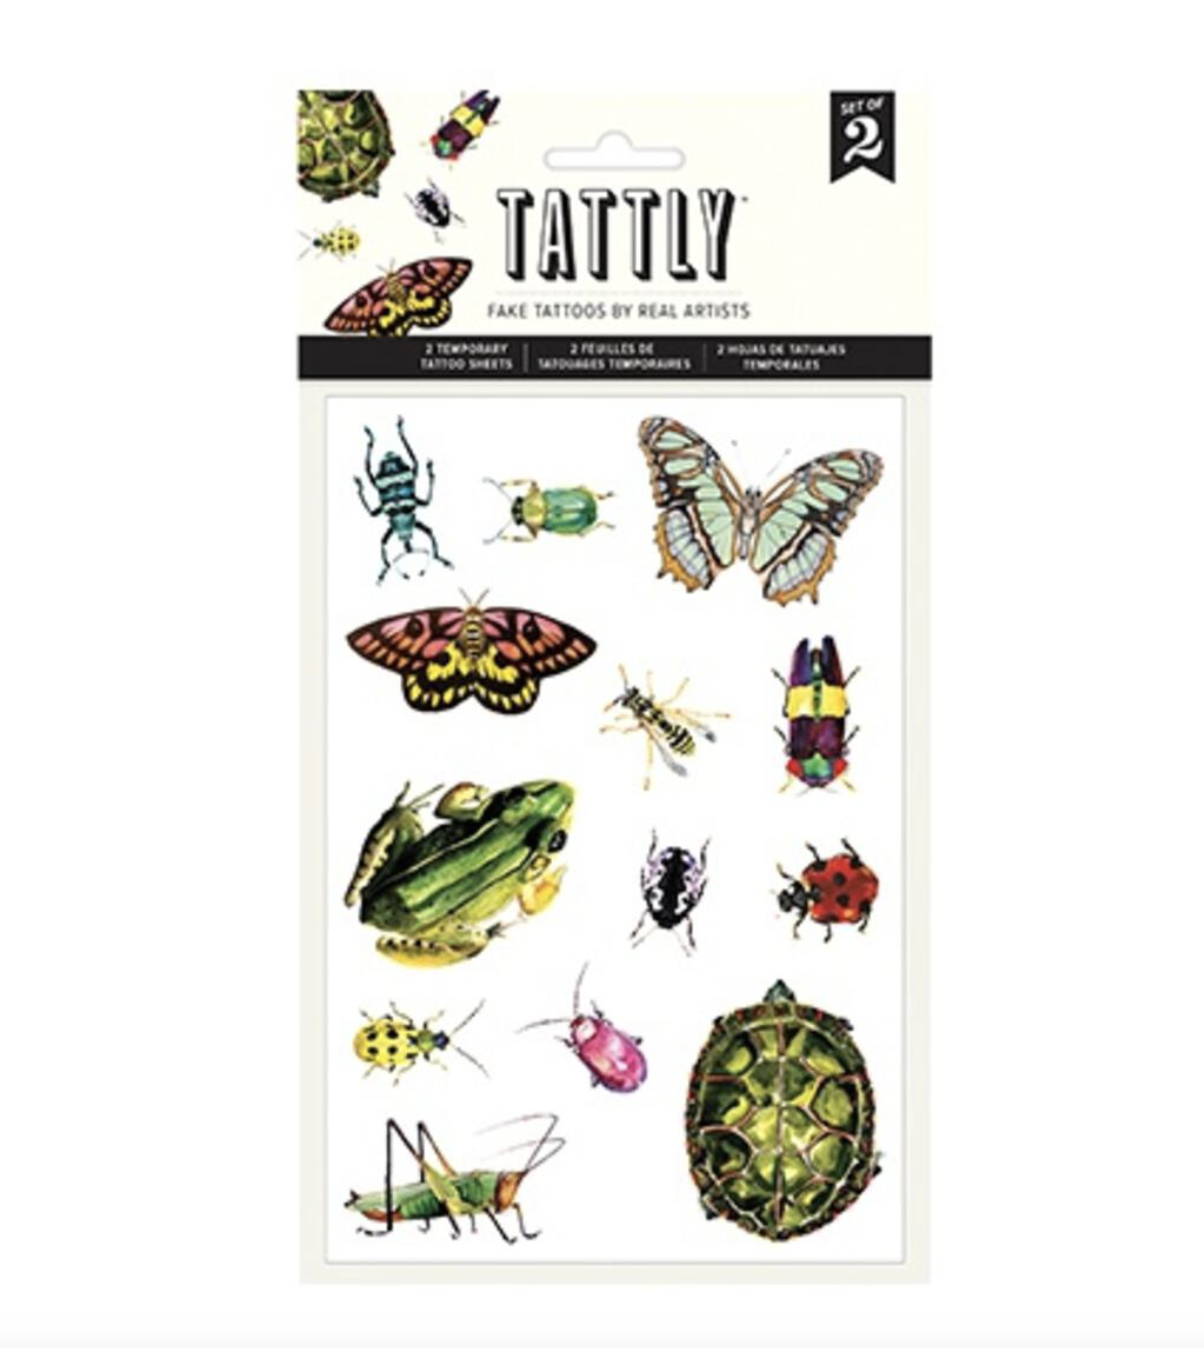 Tattly Tattoo Set of 2 - Critters on the Move